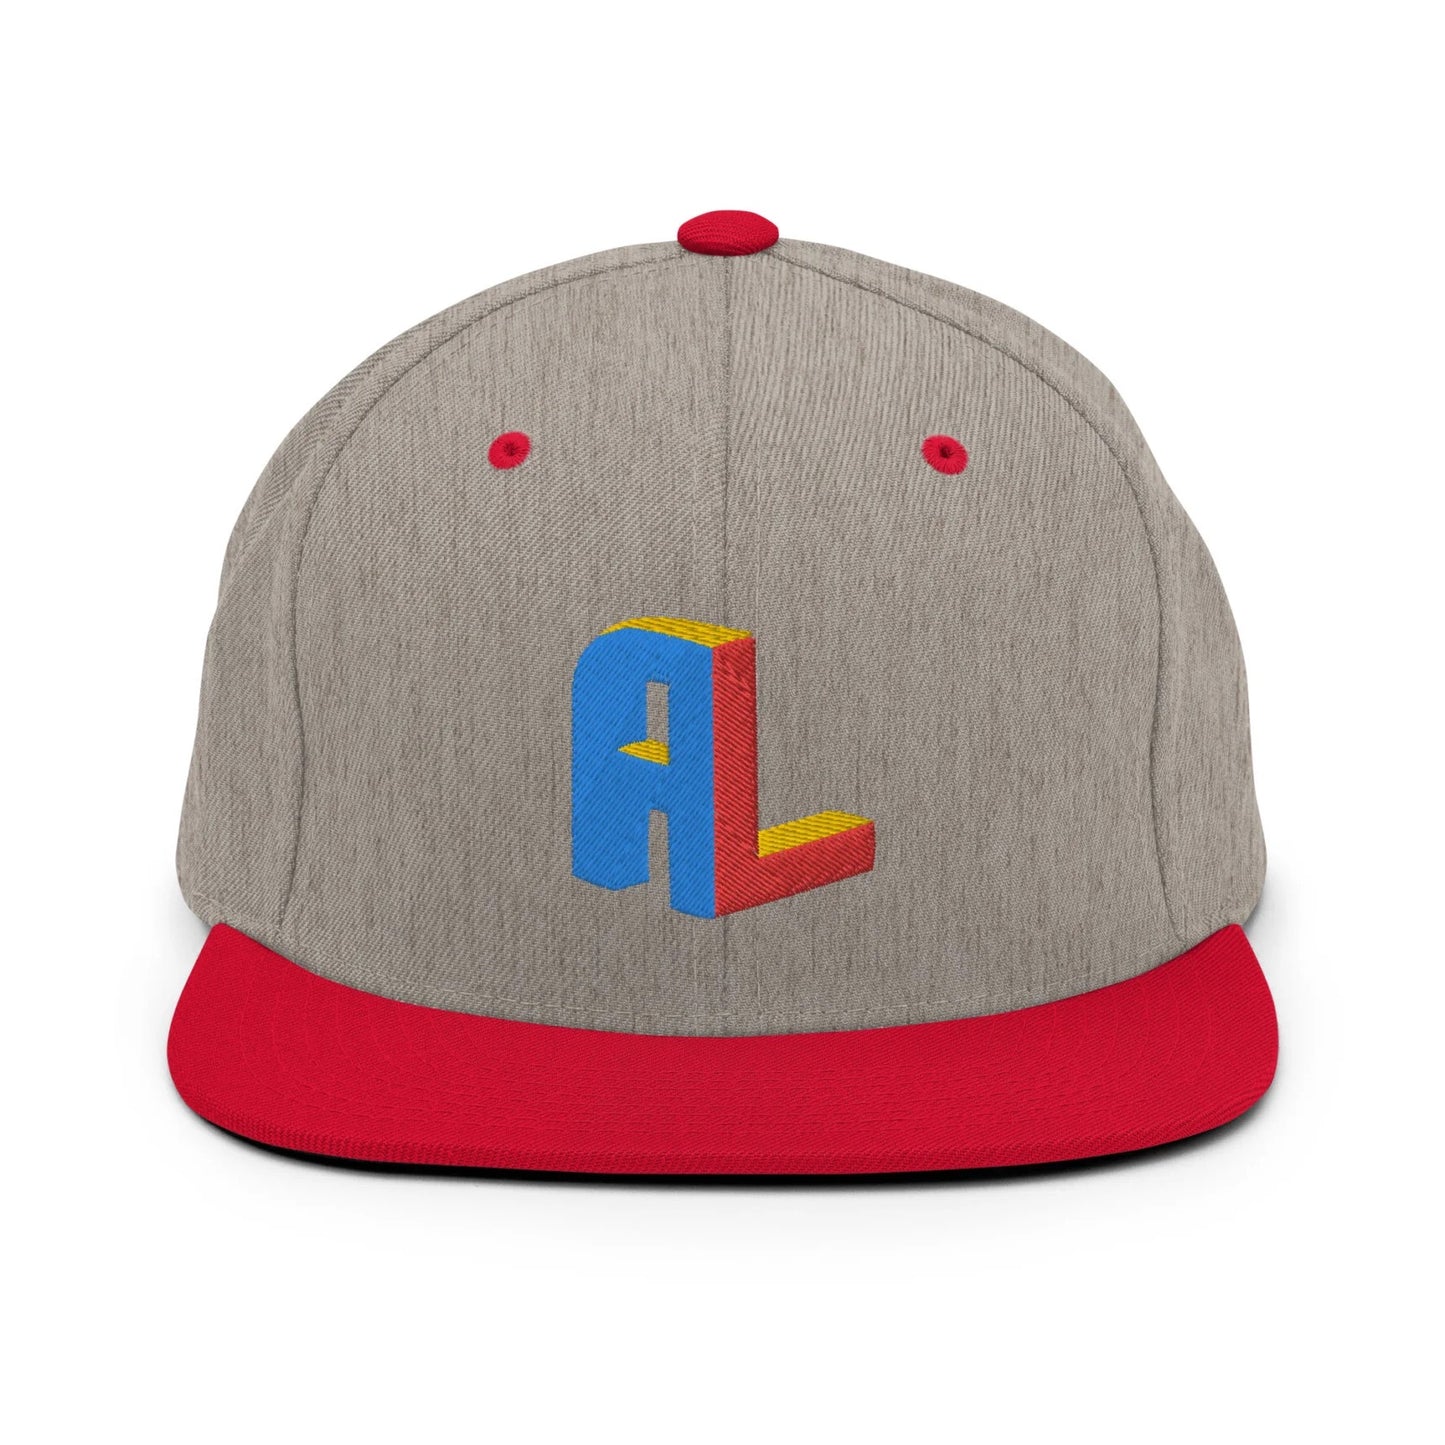 Ance Larmstrong ShowZone snapback hat in heather grey with red brim and accents